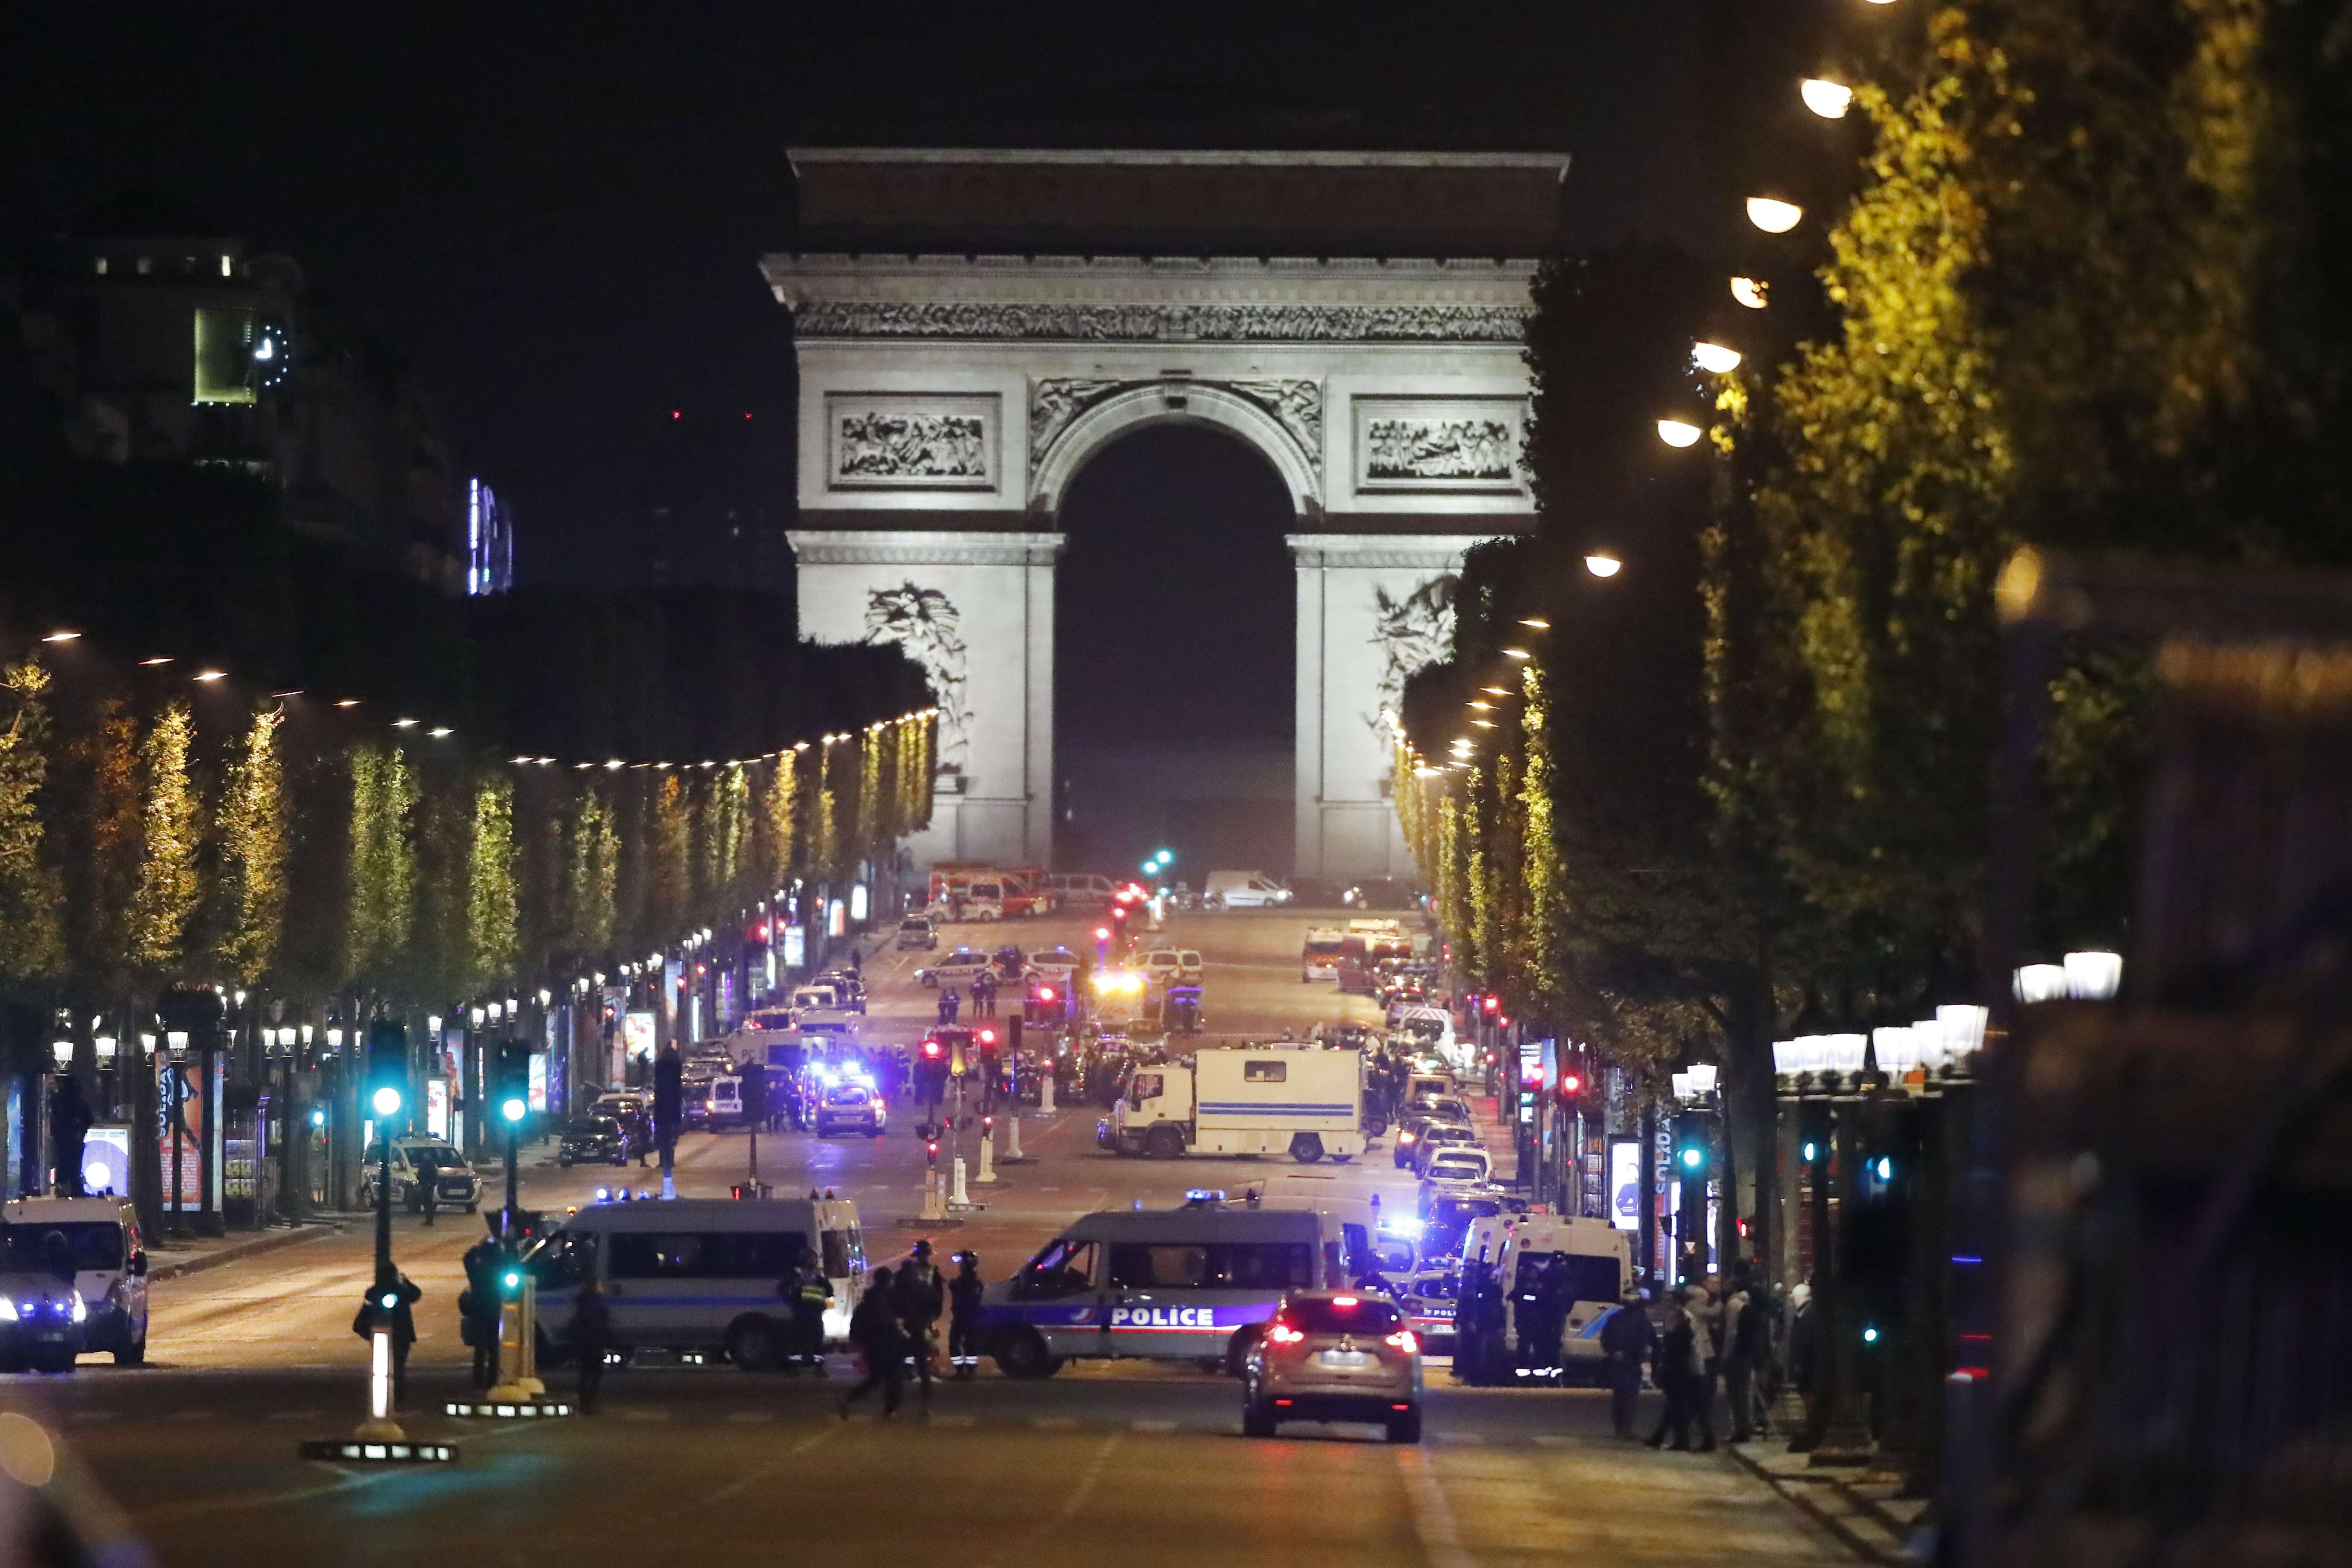 Machine gunfire erupts in the heart of the Paris tourist zone, as terror suspect riddles police car with bullets